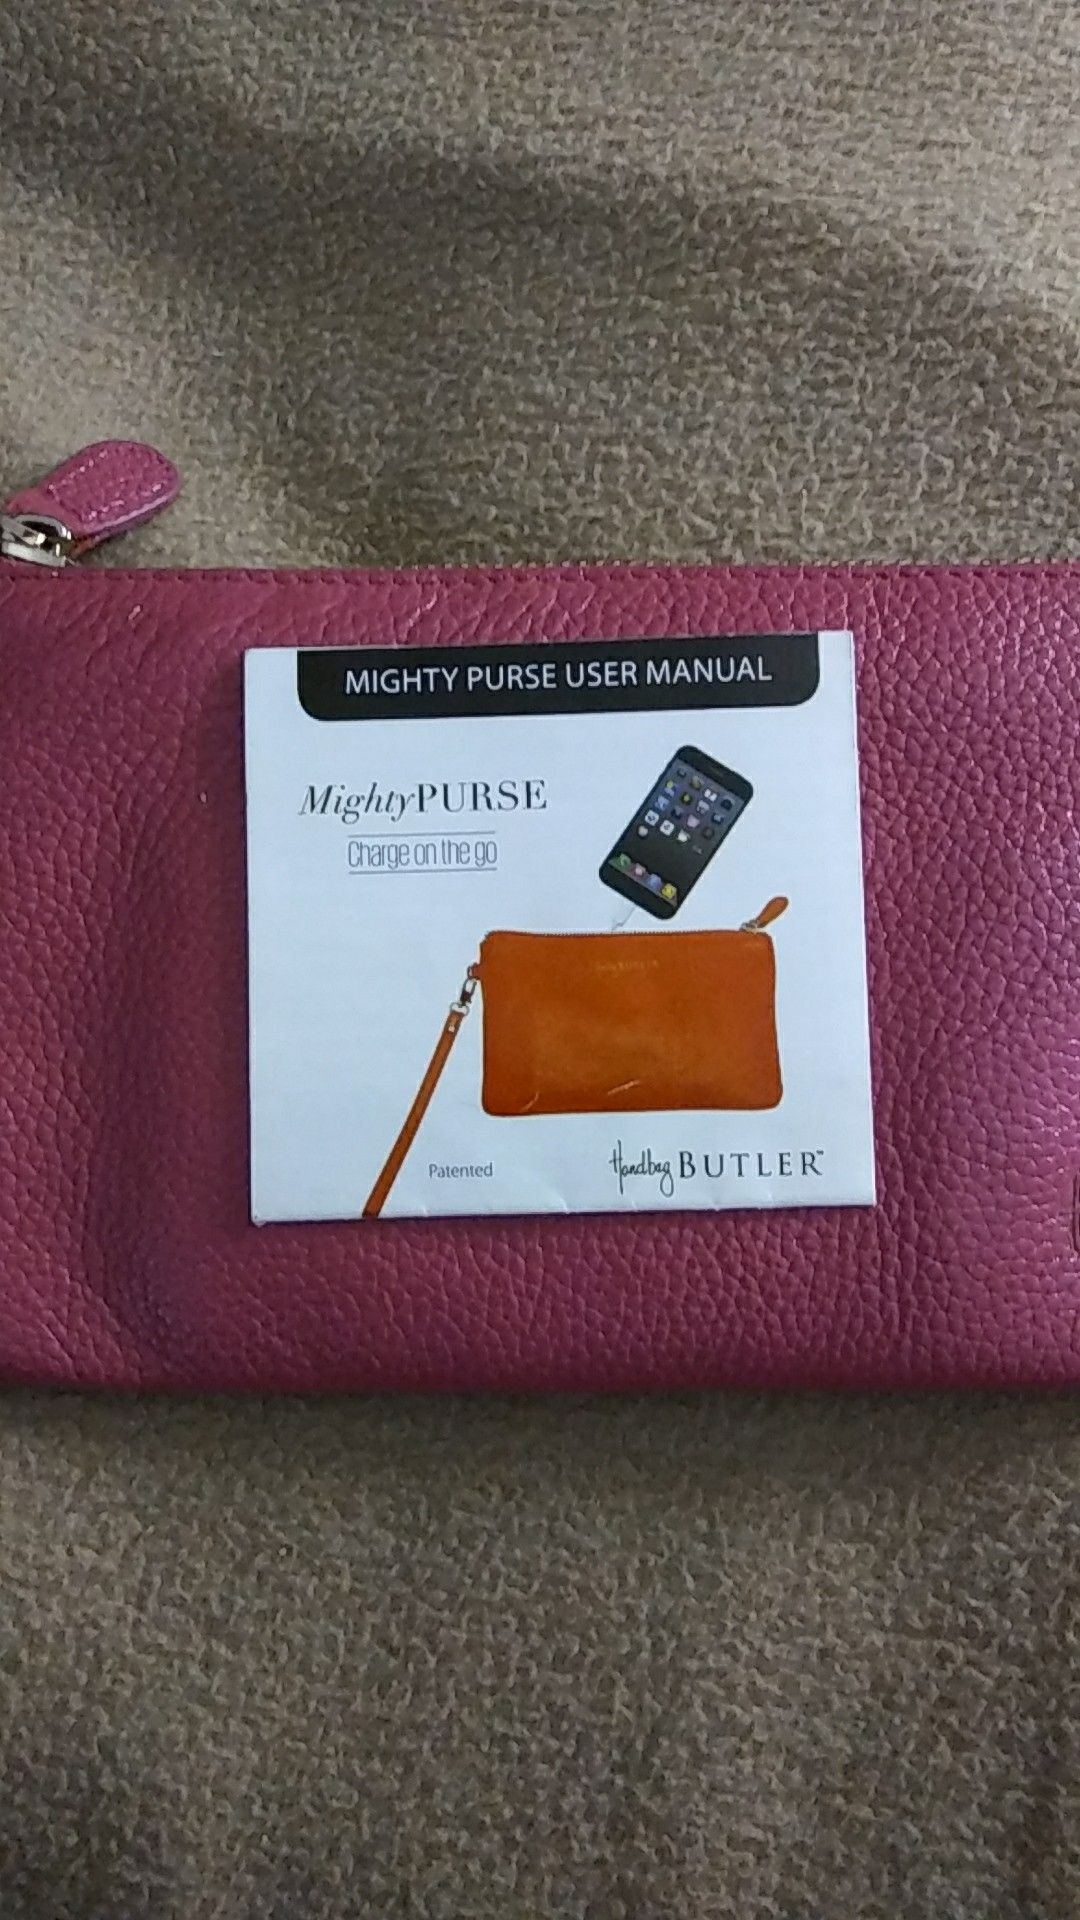 This is a portable wristlet charger